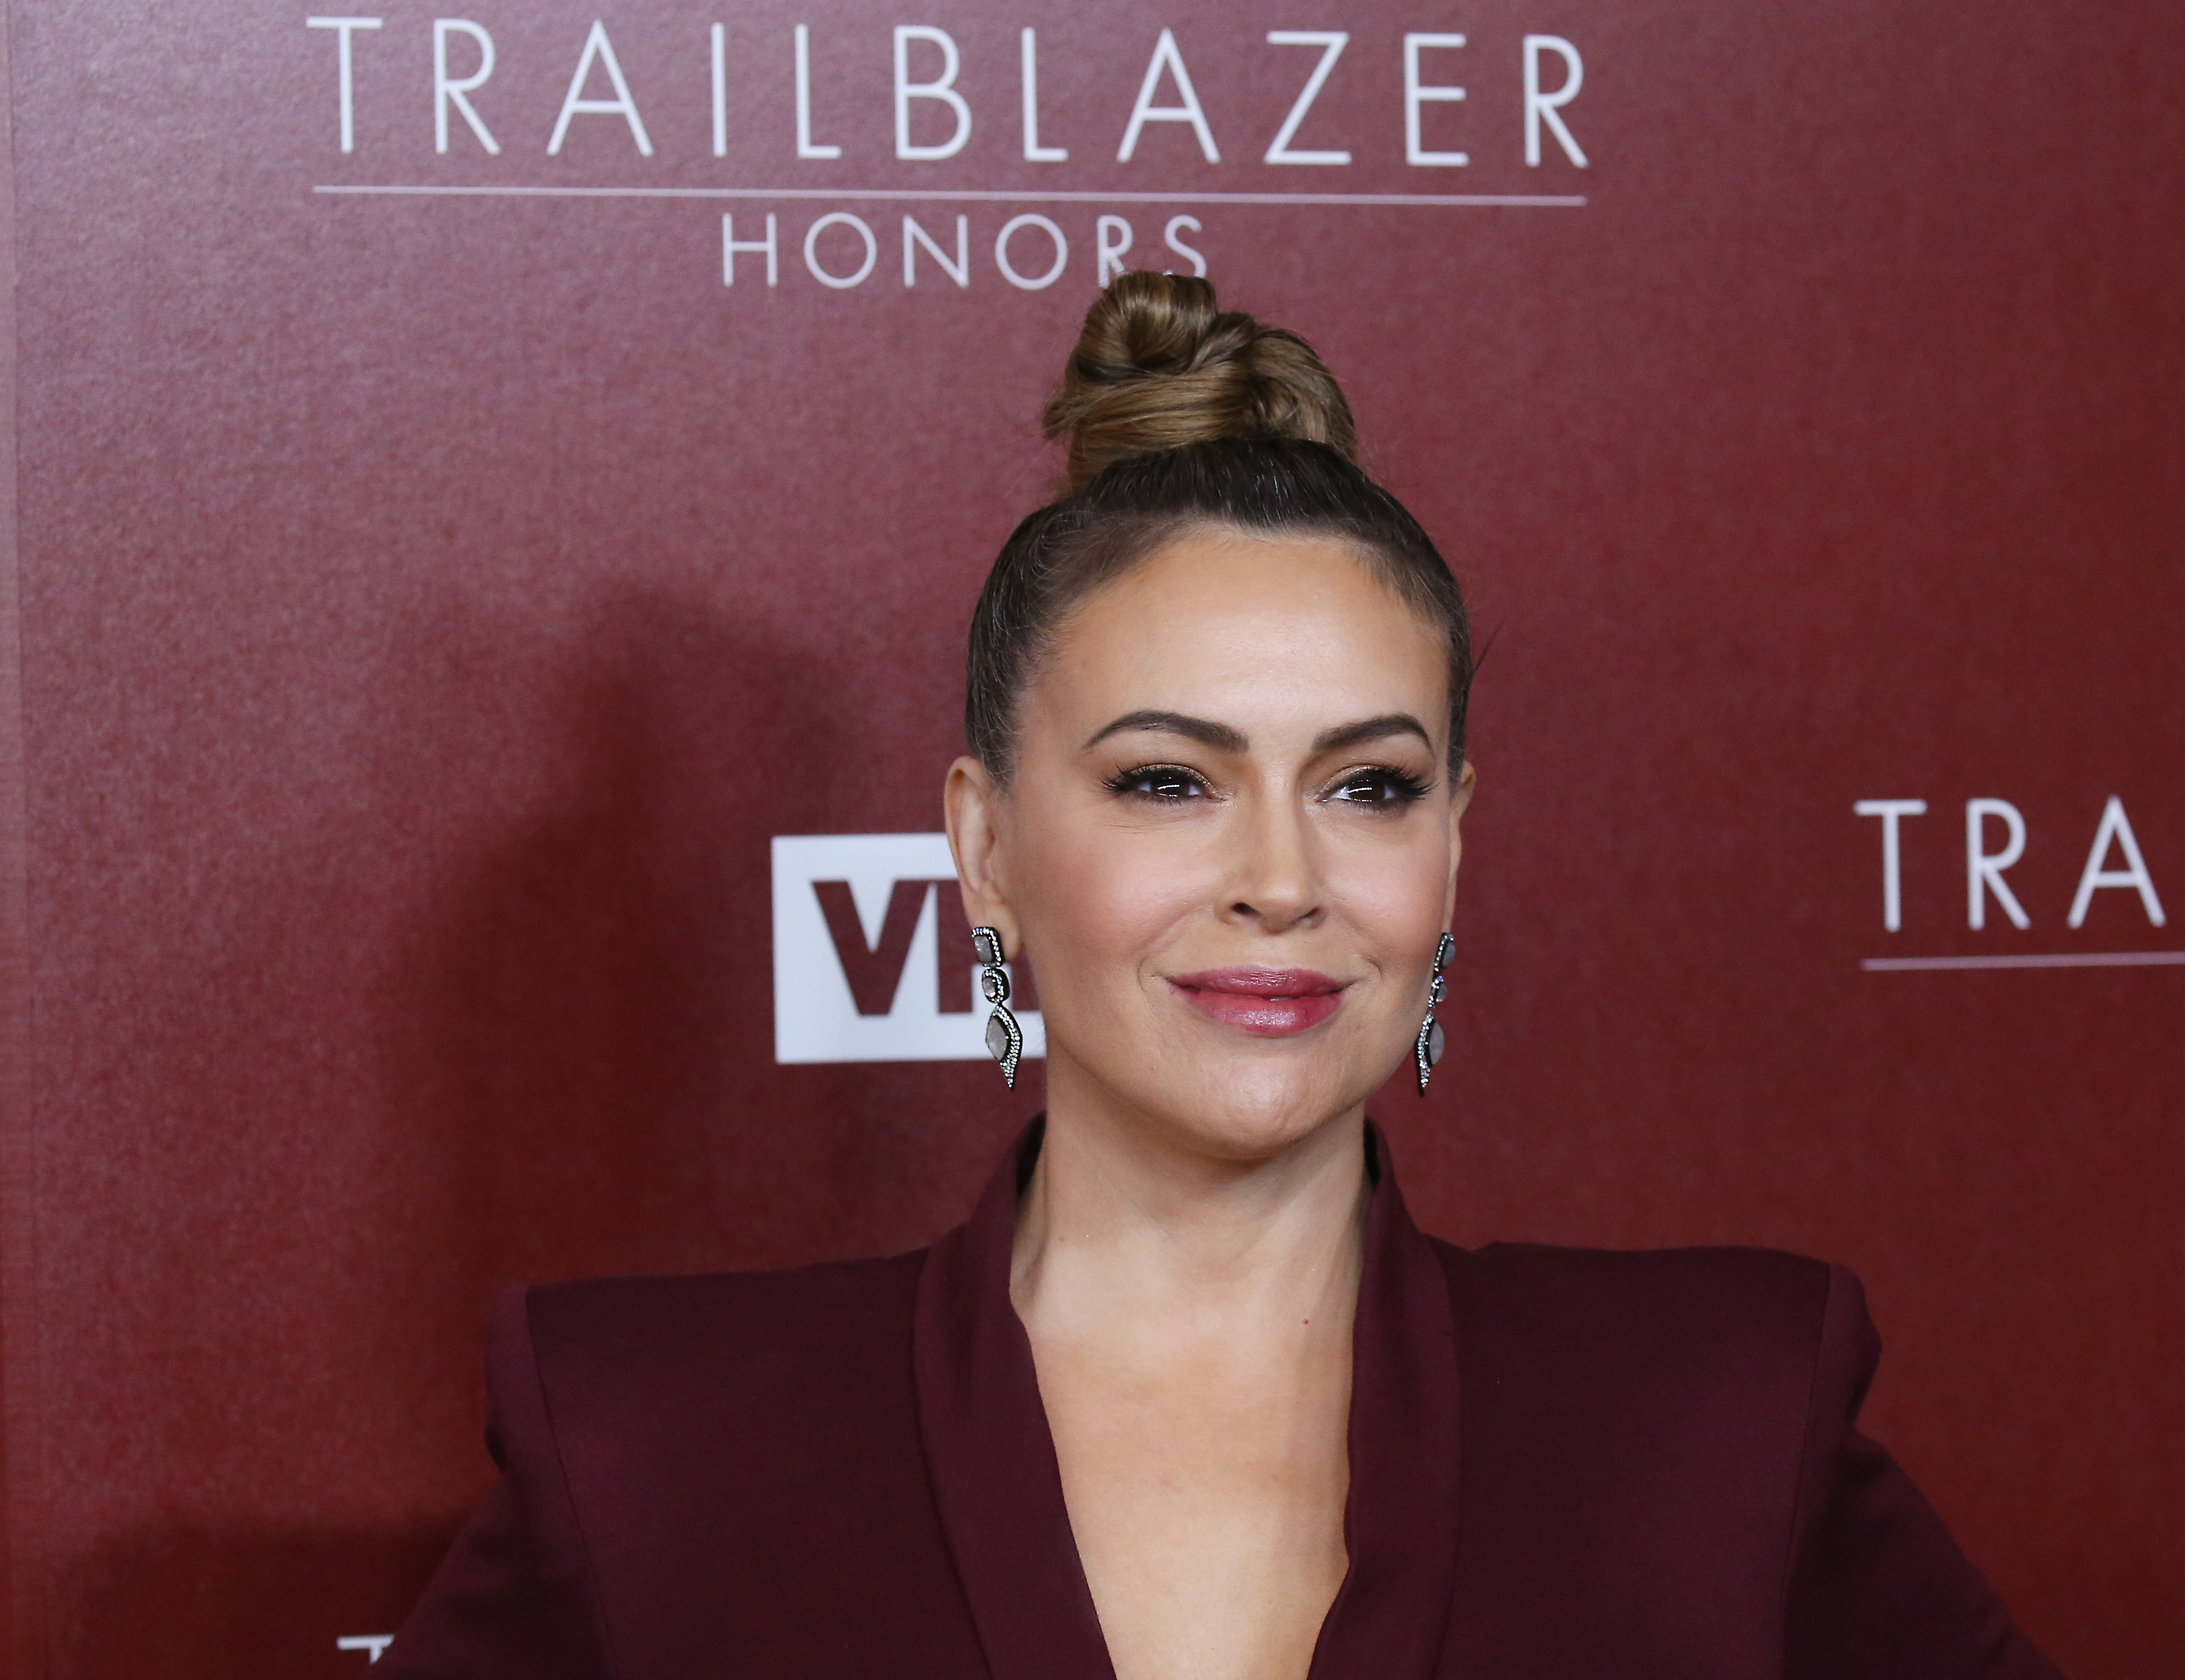 Alyssa Milano Tests Positive for COVID-19 Antibodies After 3 Negative Results